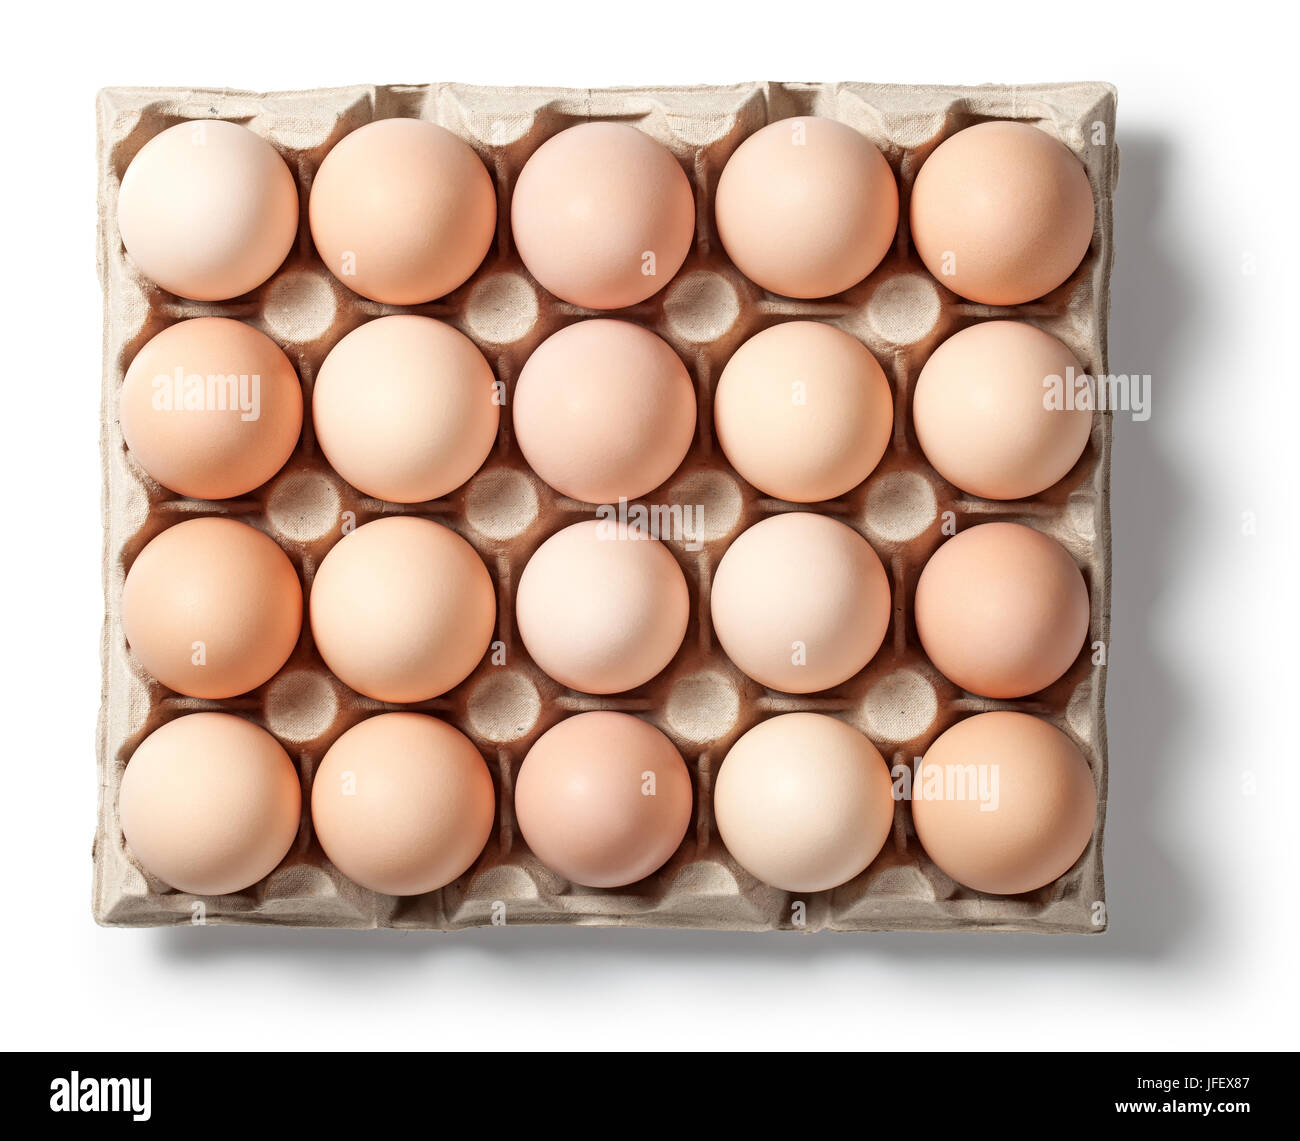 Chicken Eggs in Container Stock Photo